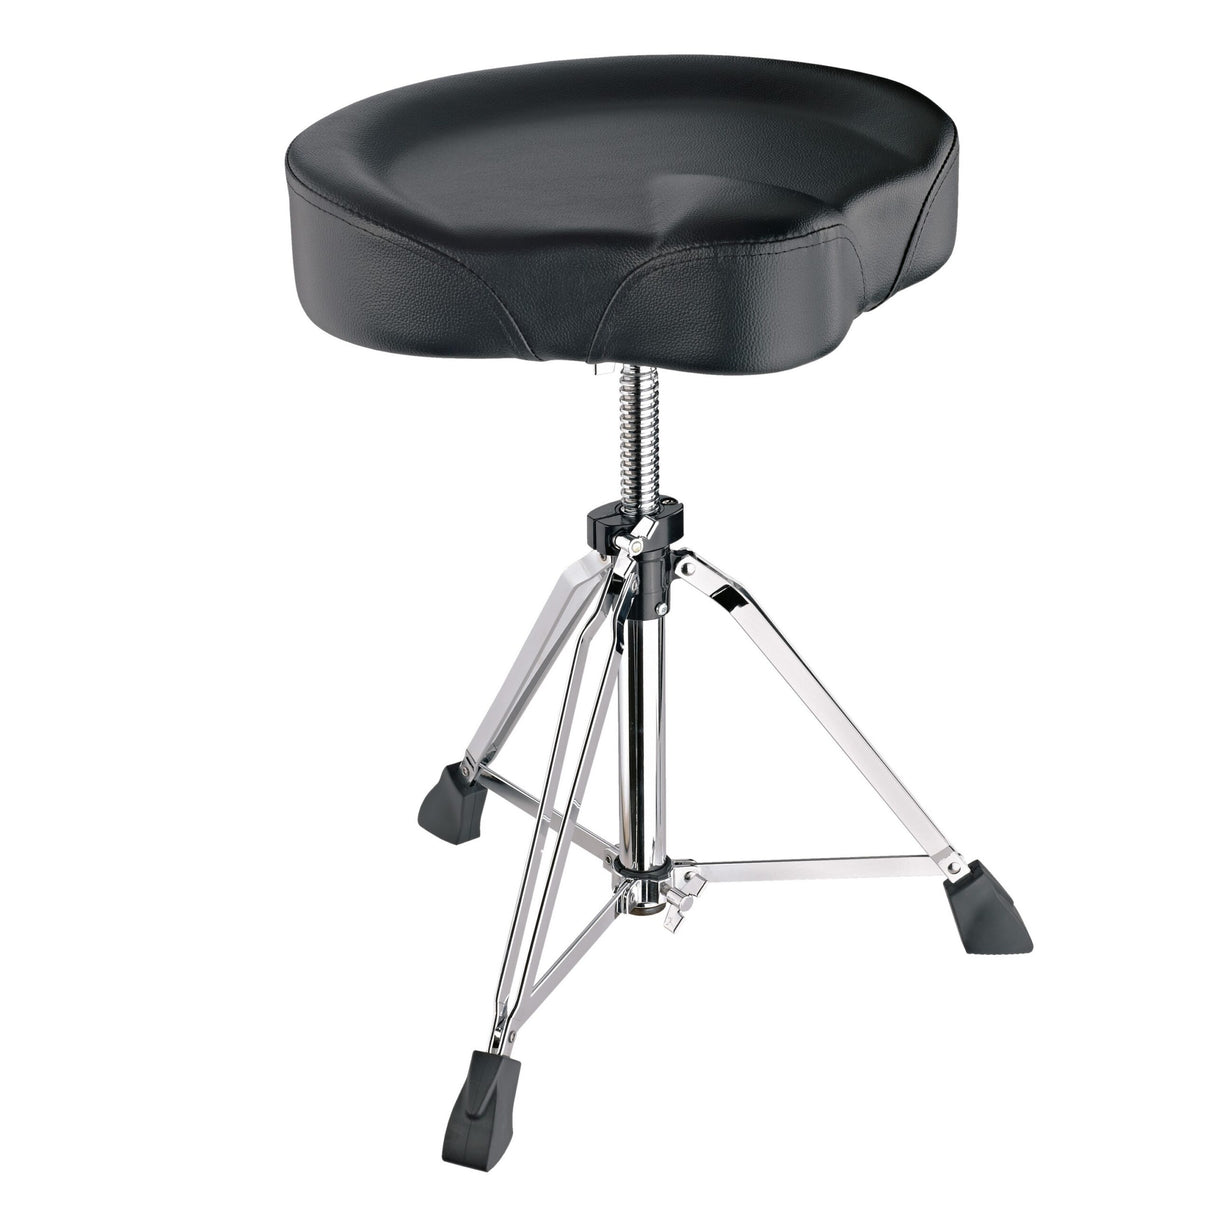 K&M 14038 Spindle Drummers Throne Chair, Black